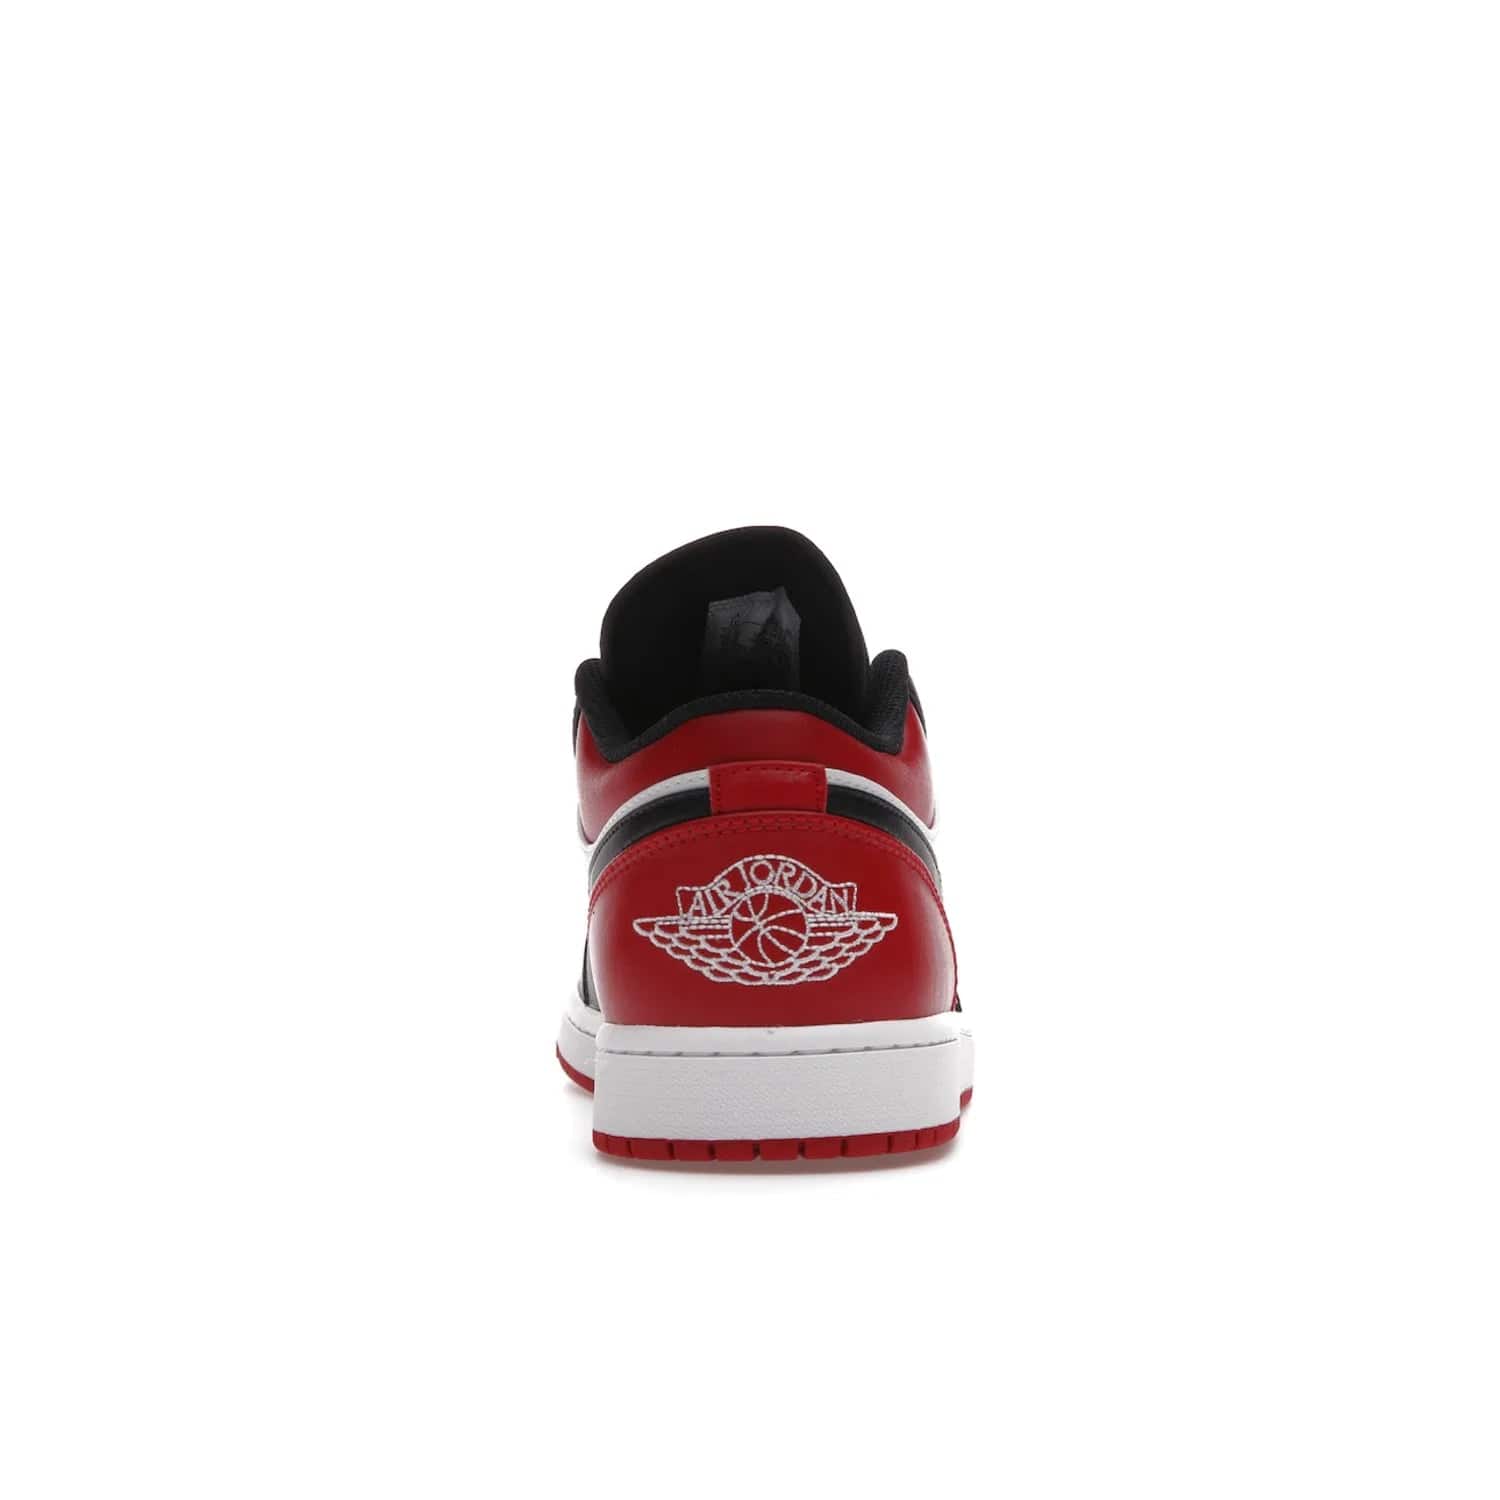 Jordan 1 Low Bred Toe - Image 28 - Only at www.BallersClubKickz.com - Step into the iconic Jordan 1 Retro. Mixing and matching of leather in red, black, and white makes for a unique colorway. Finished off with a Wing logo embroidery & Jumpman label. Comfortable and stylish at an affordable $100, the Jordan 1 Low Bred Toe is perfect for any true sneaker fan.